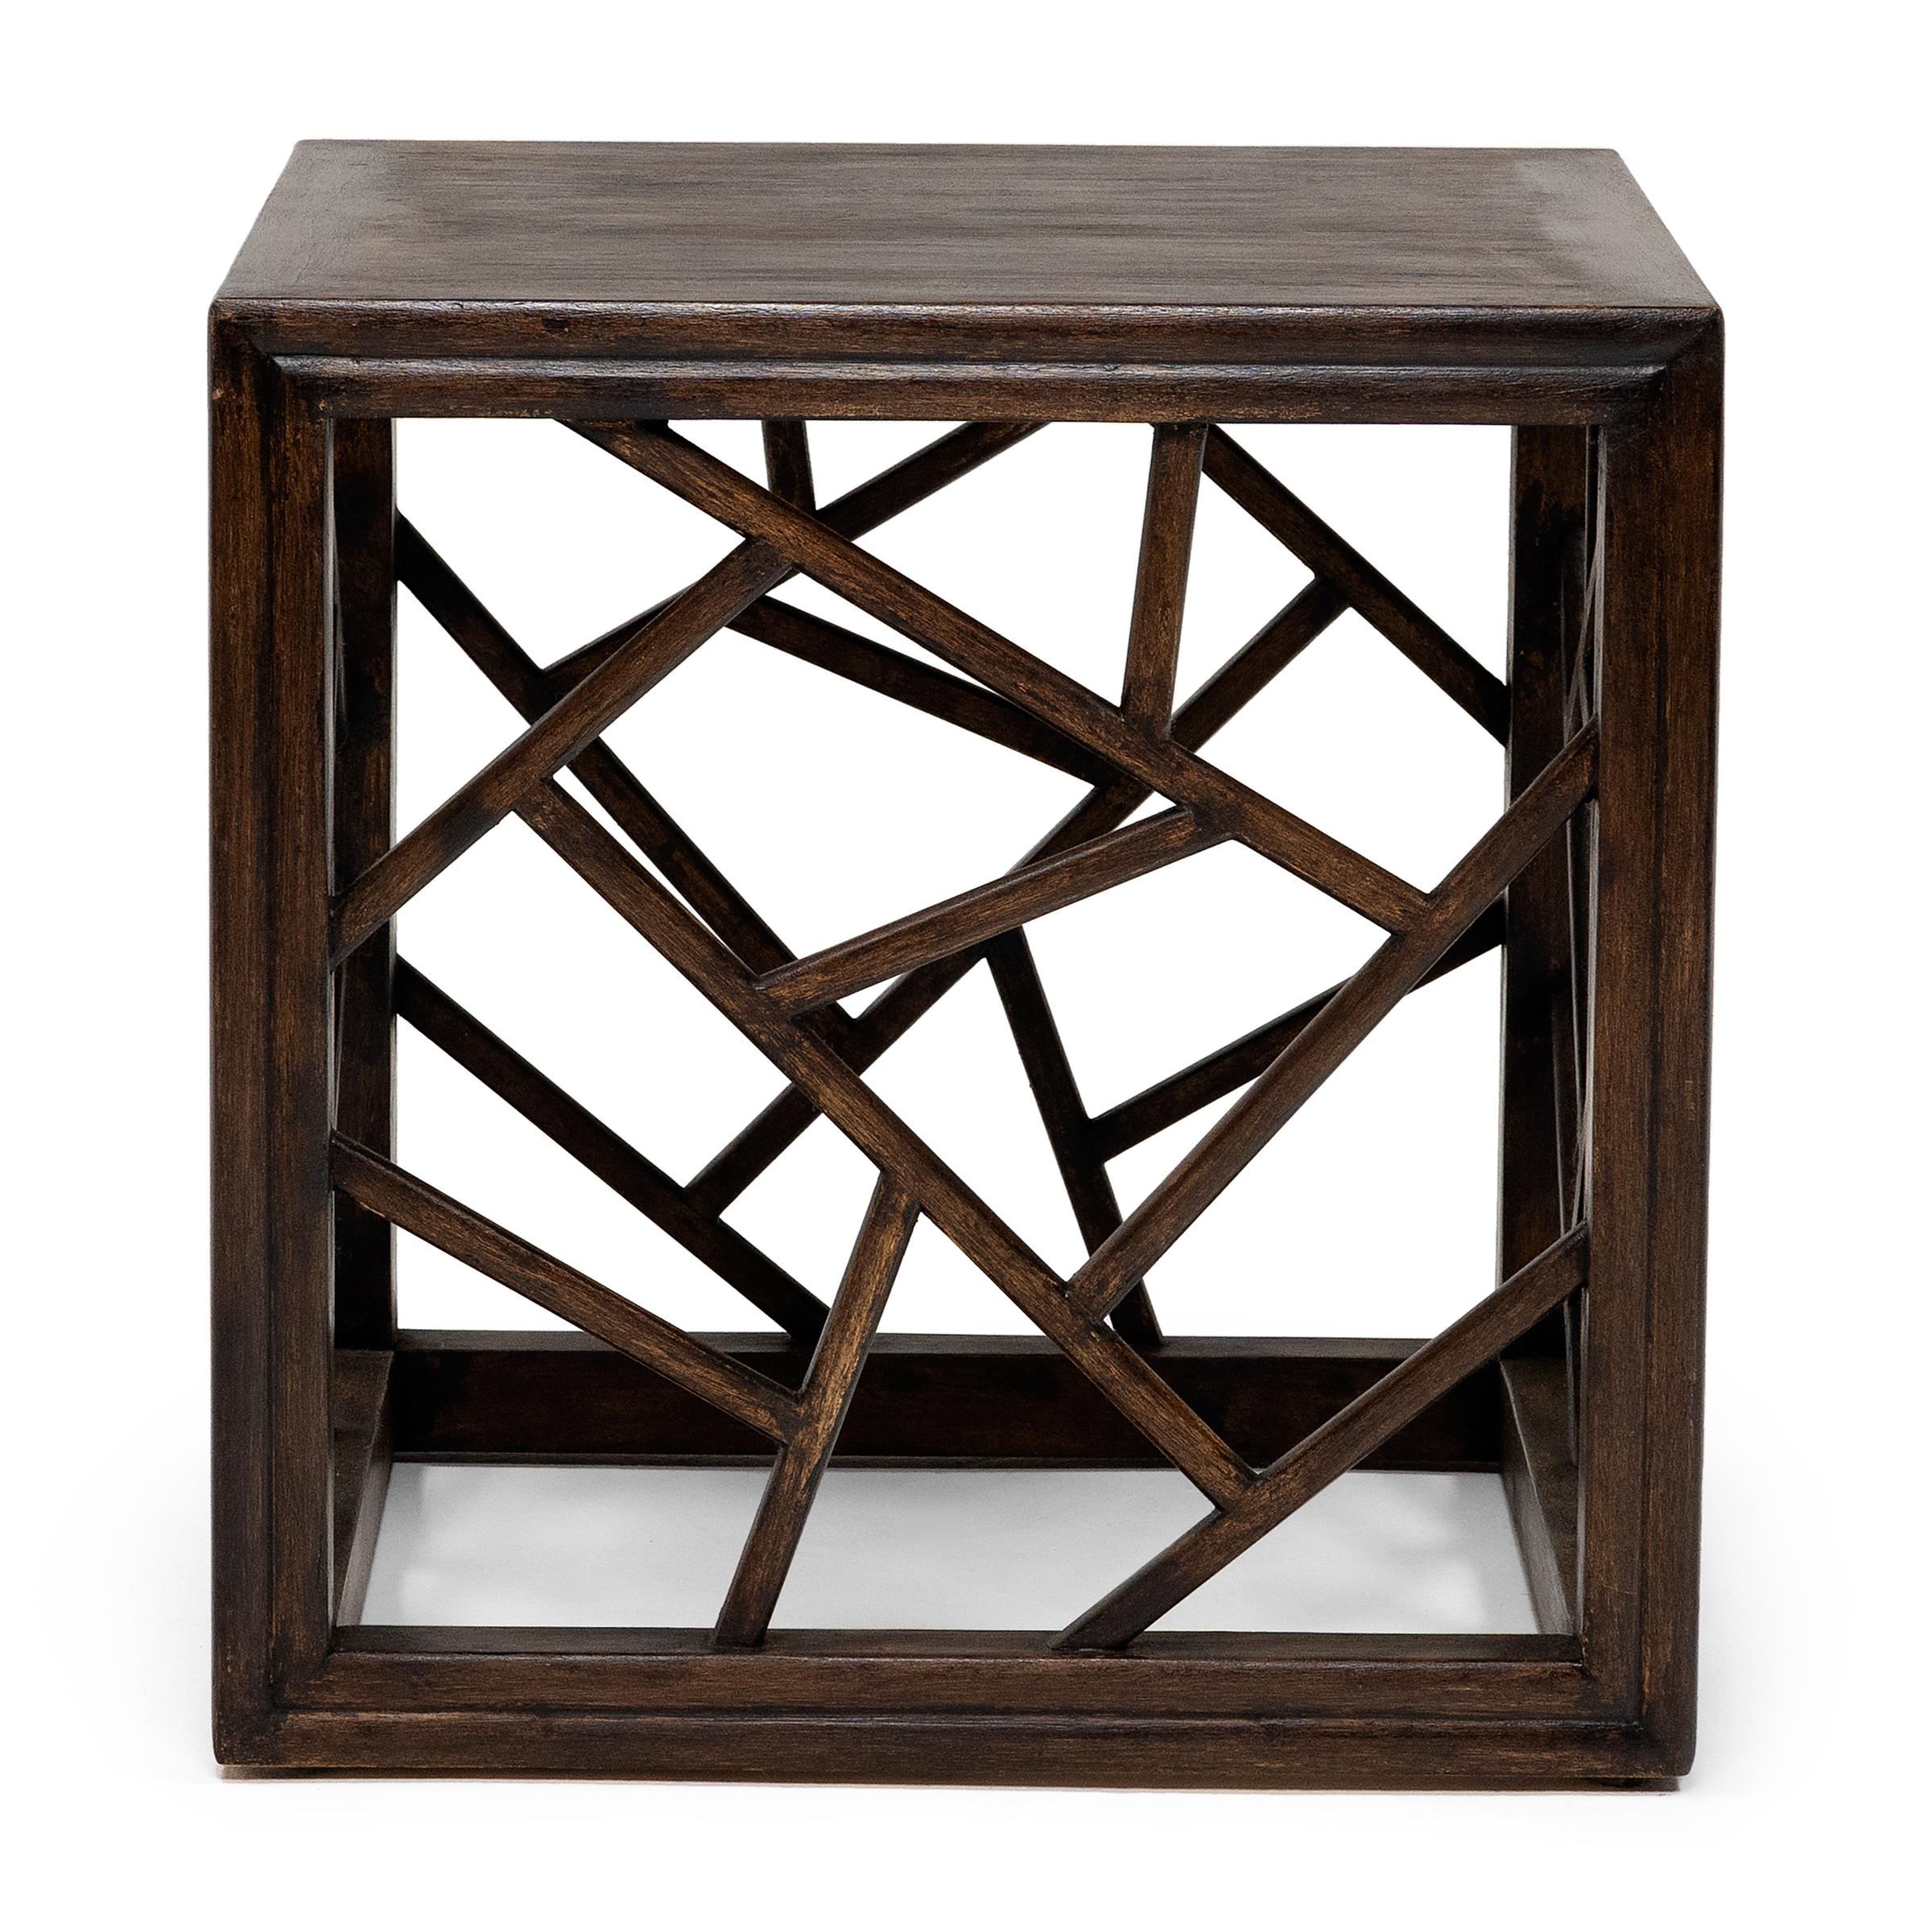 This low side table honors traditional Chinese furniture forms with a simple squared frame and cracked ice lattice sides. Cracked ice lattice, known as 